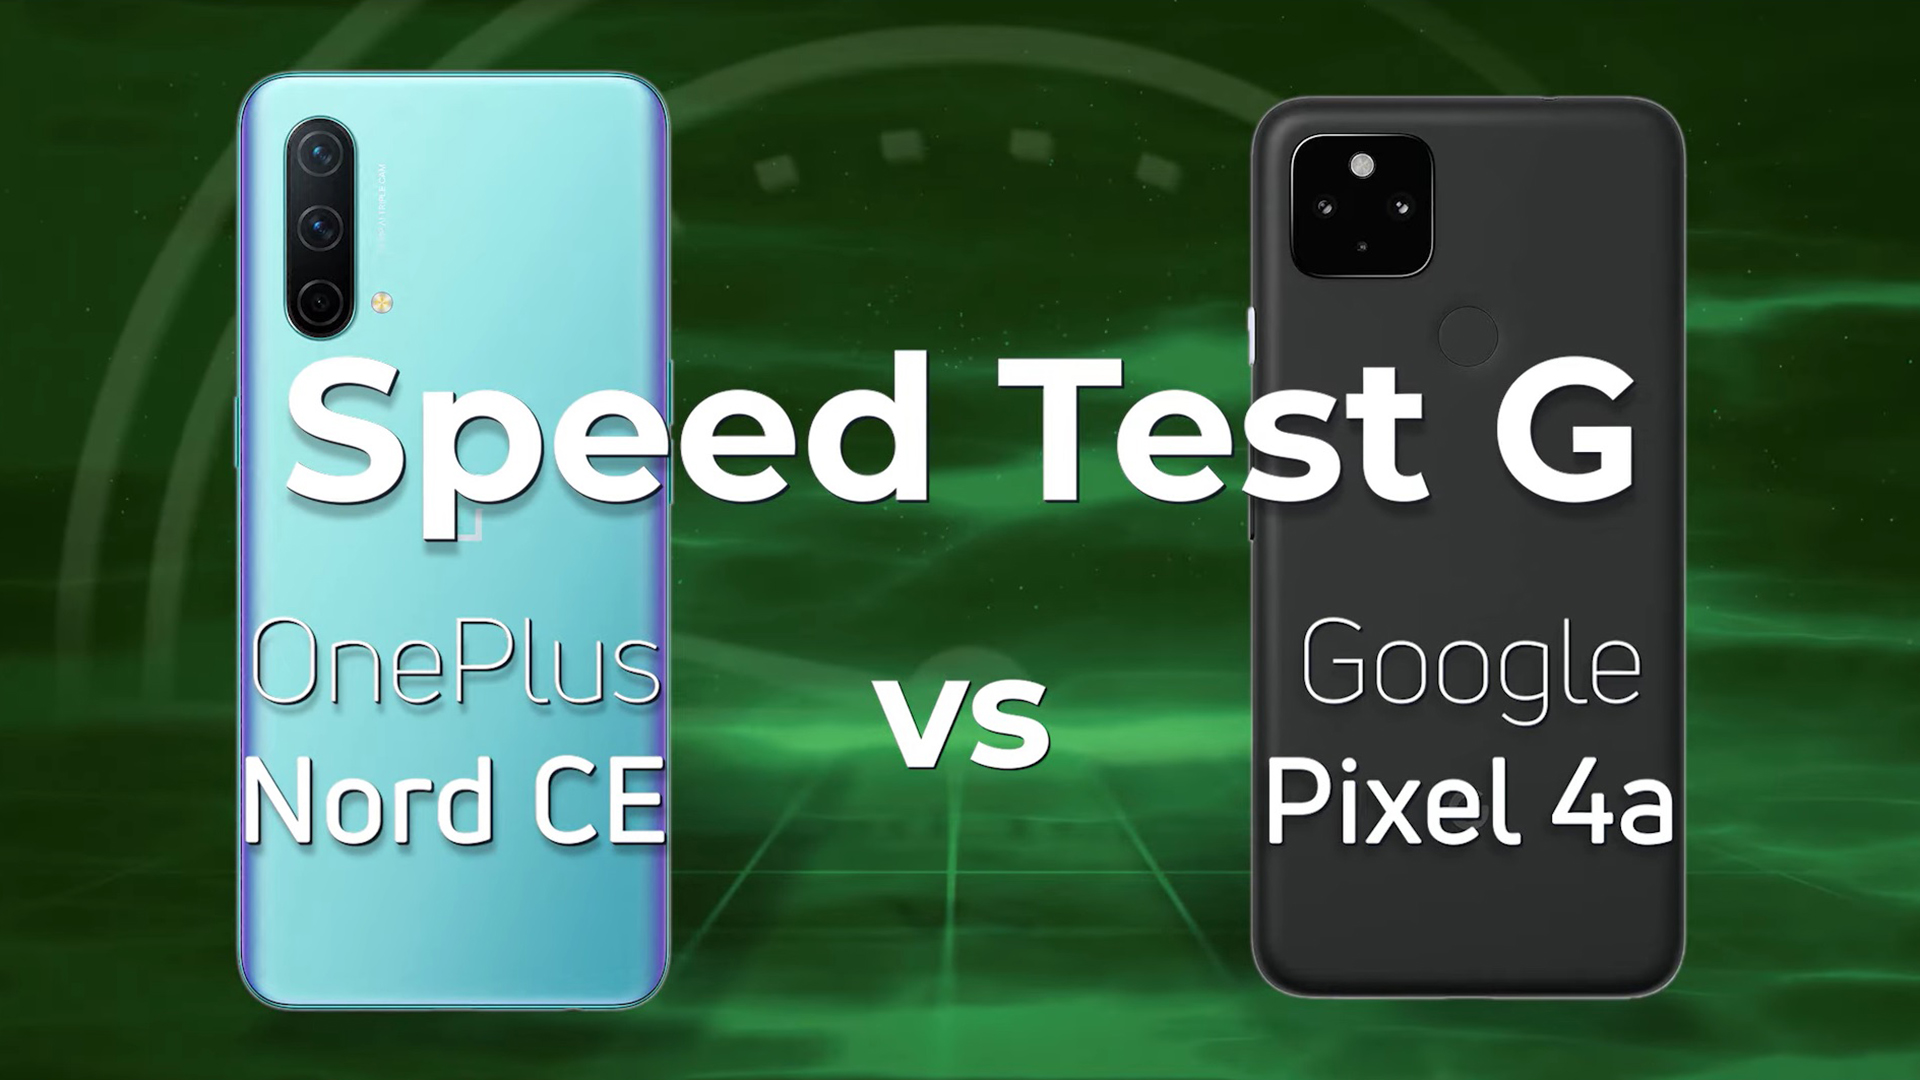 OnePlus Nord CE vs Google Pixel 4a Speed Test G